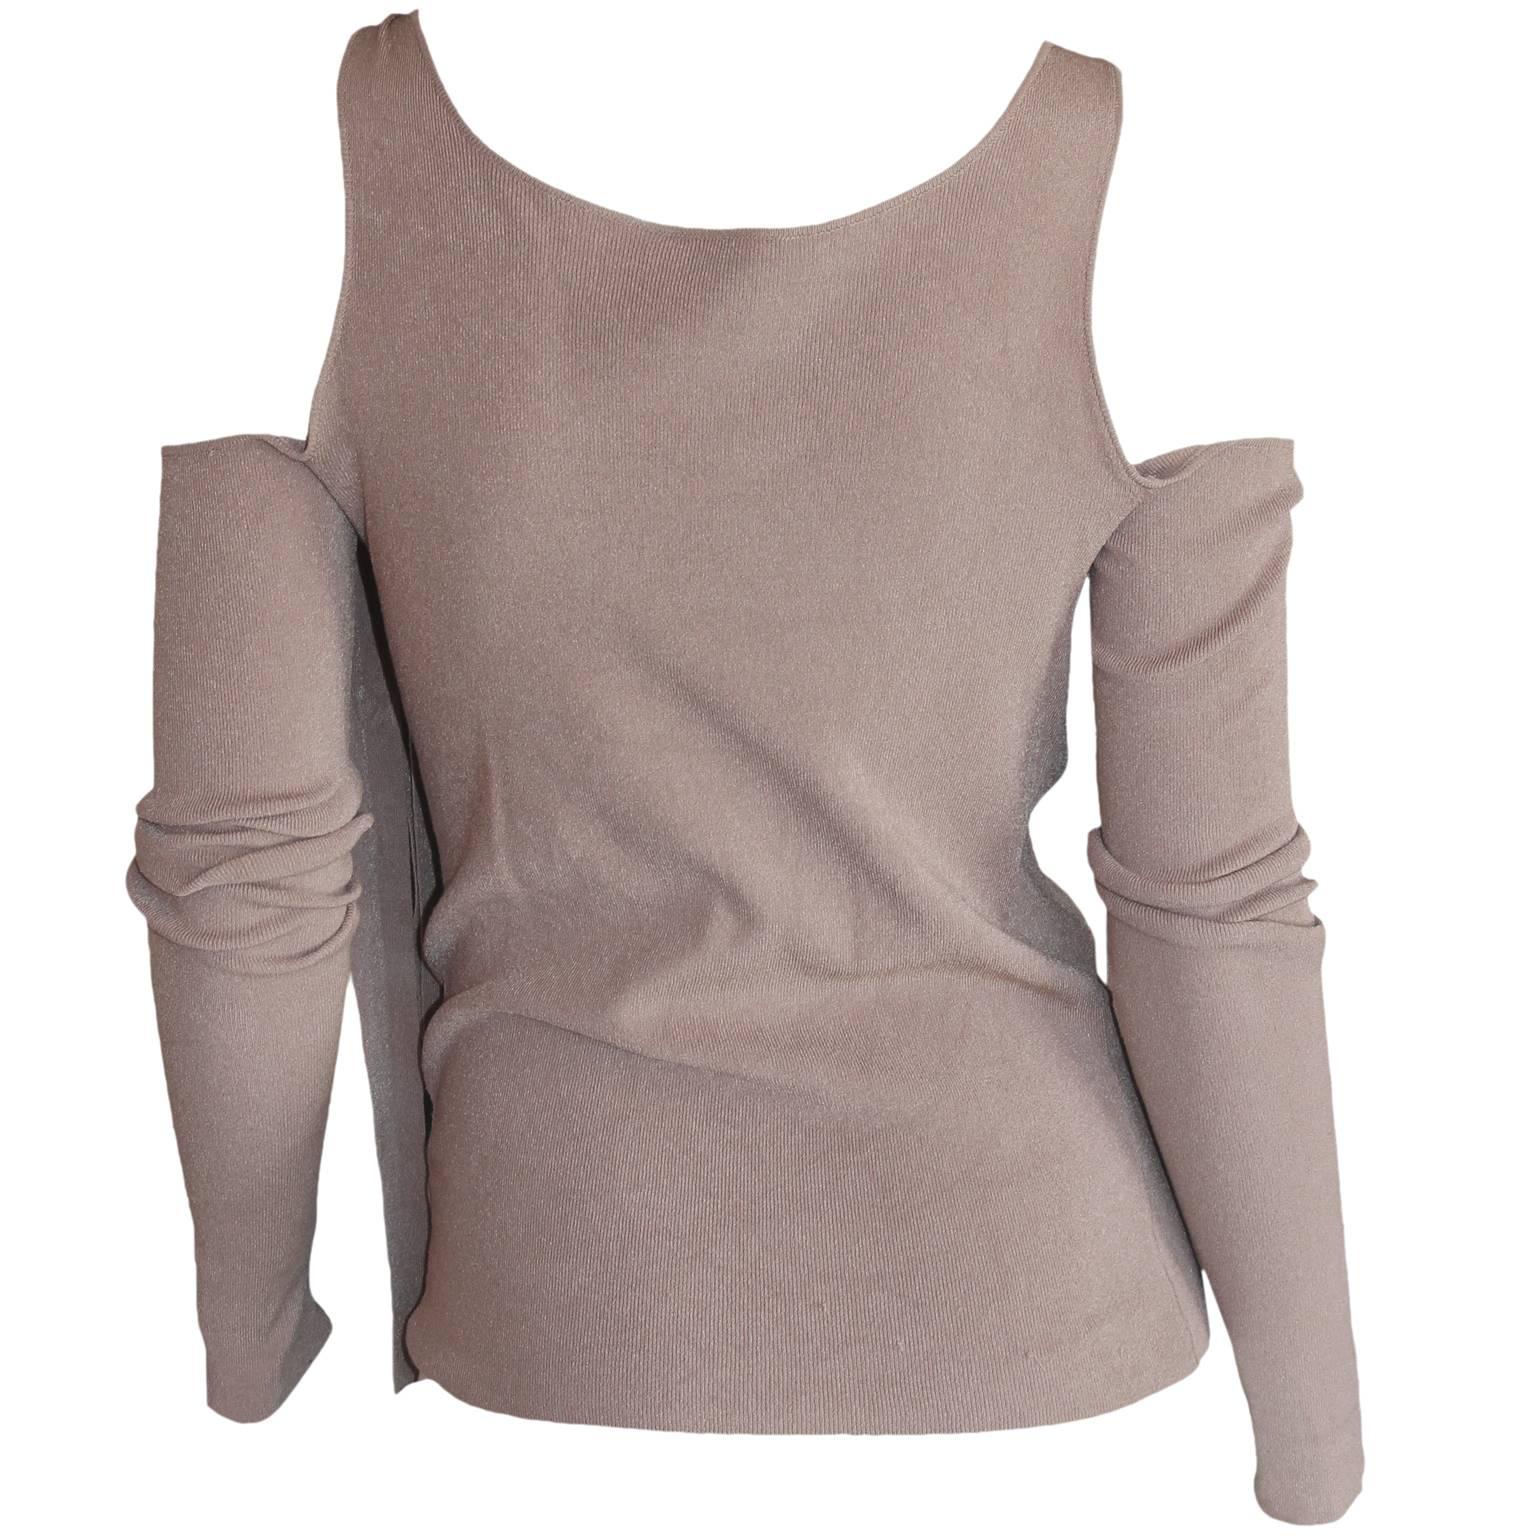 The Most Gorgeous Tom Ford For Gucci Fall Winter 2003 Mauve Brown Cold-Shoulder Sweater!

Considered by many to be his greatest collection of all, Tom Ford's fall winter 2003 collection for Gucci was simply awash with the most heavenly corseted